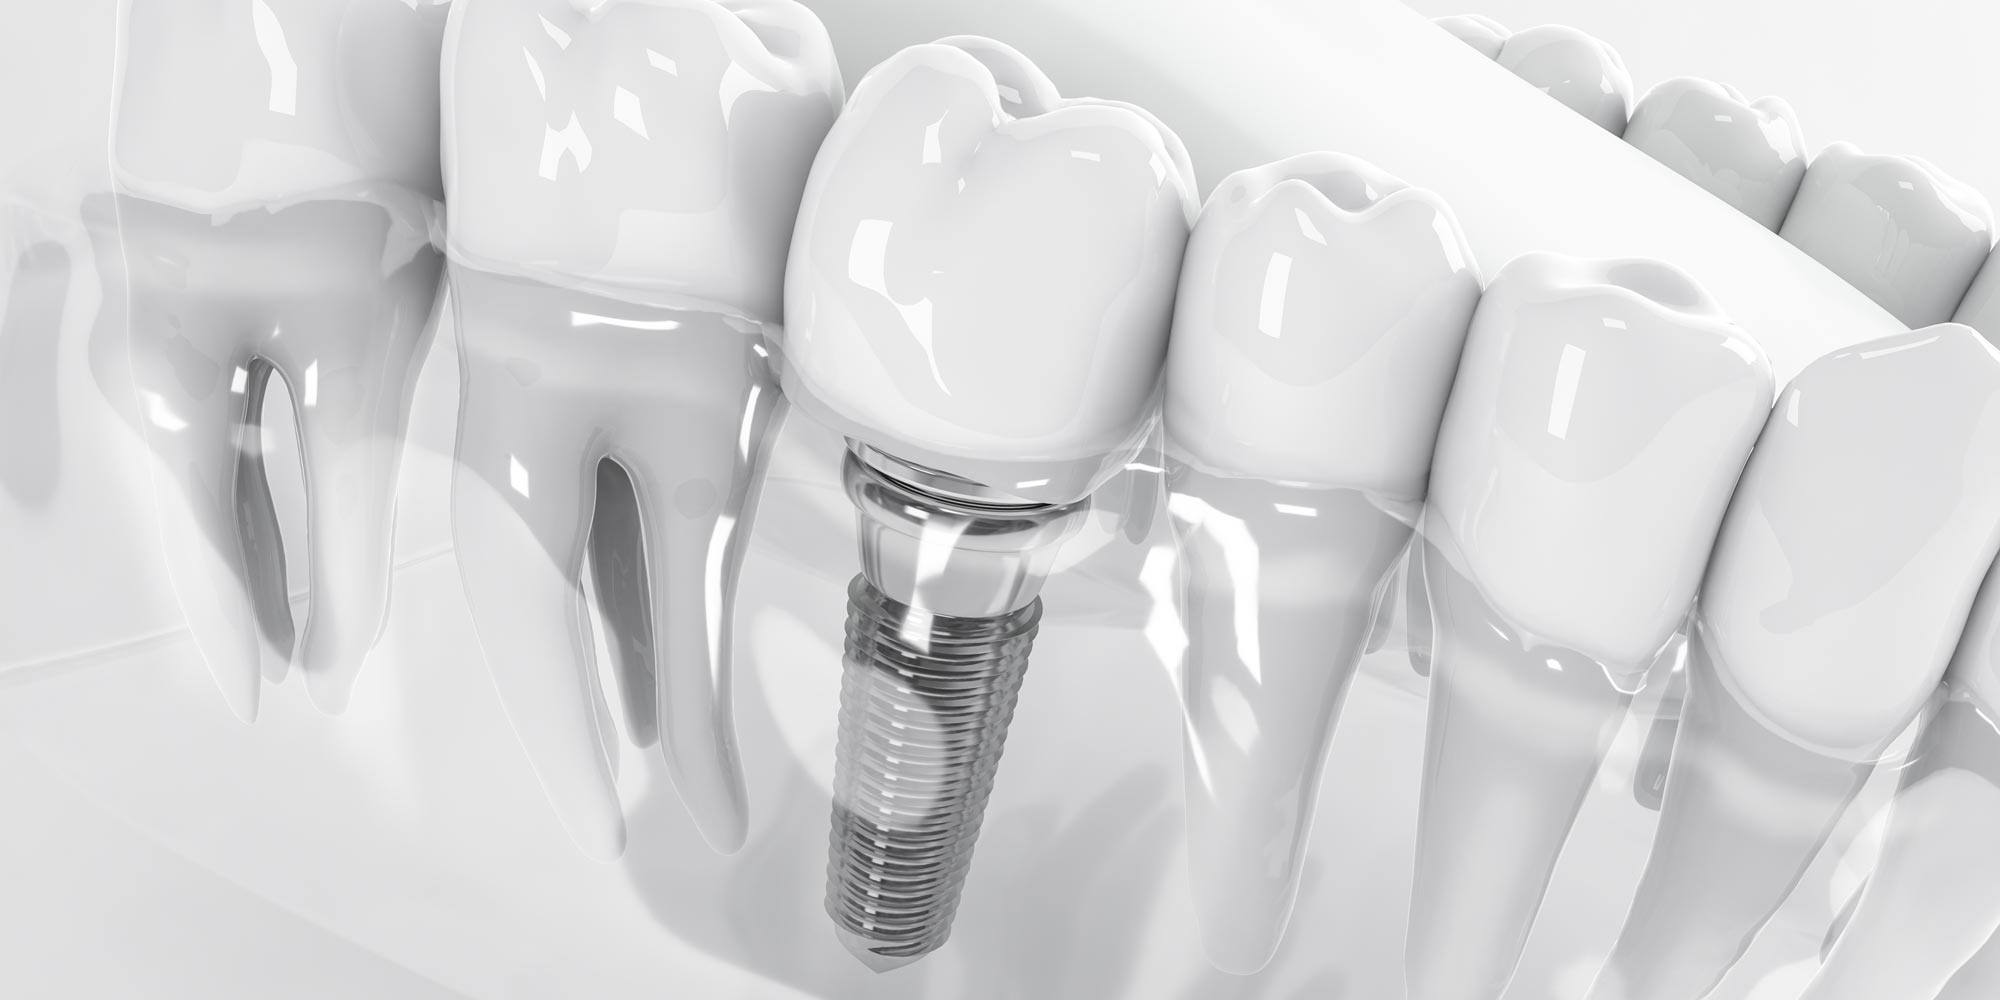 Missing or damaged teeth? Here’s what dental implants can do for you!